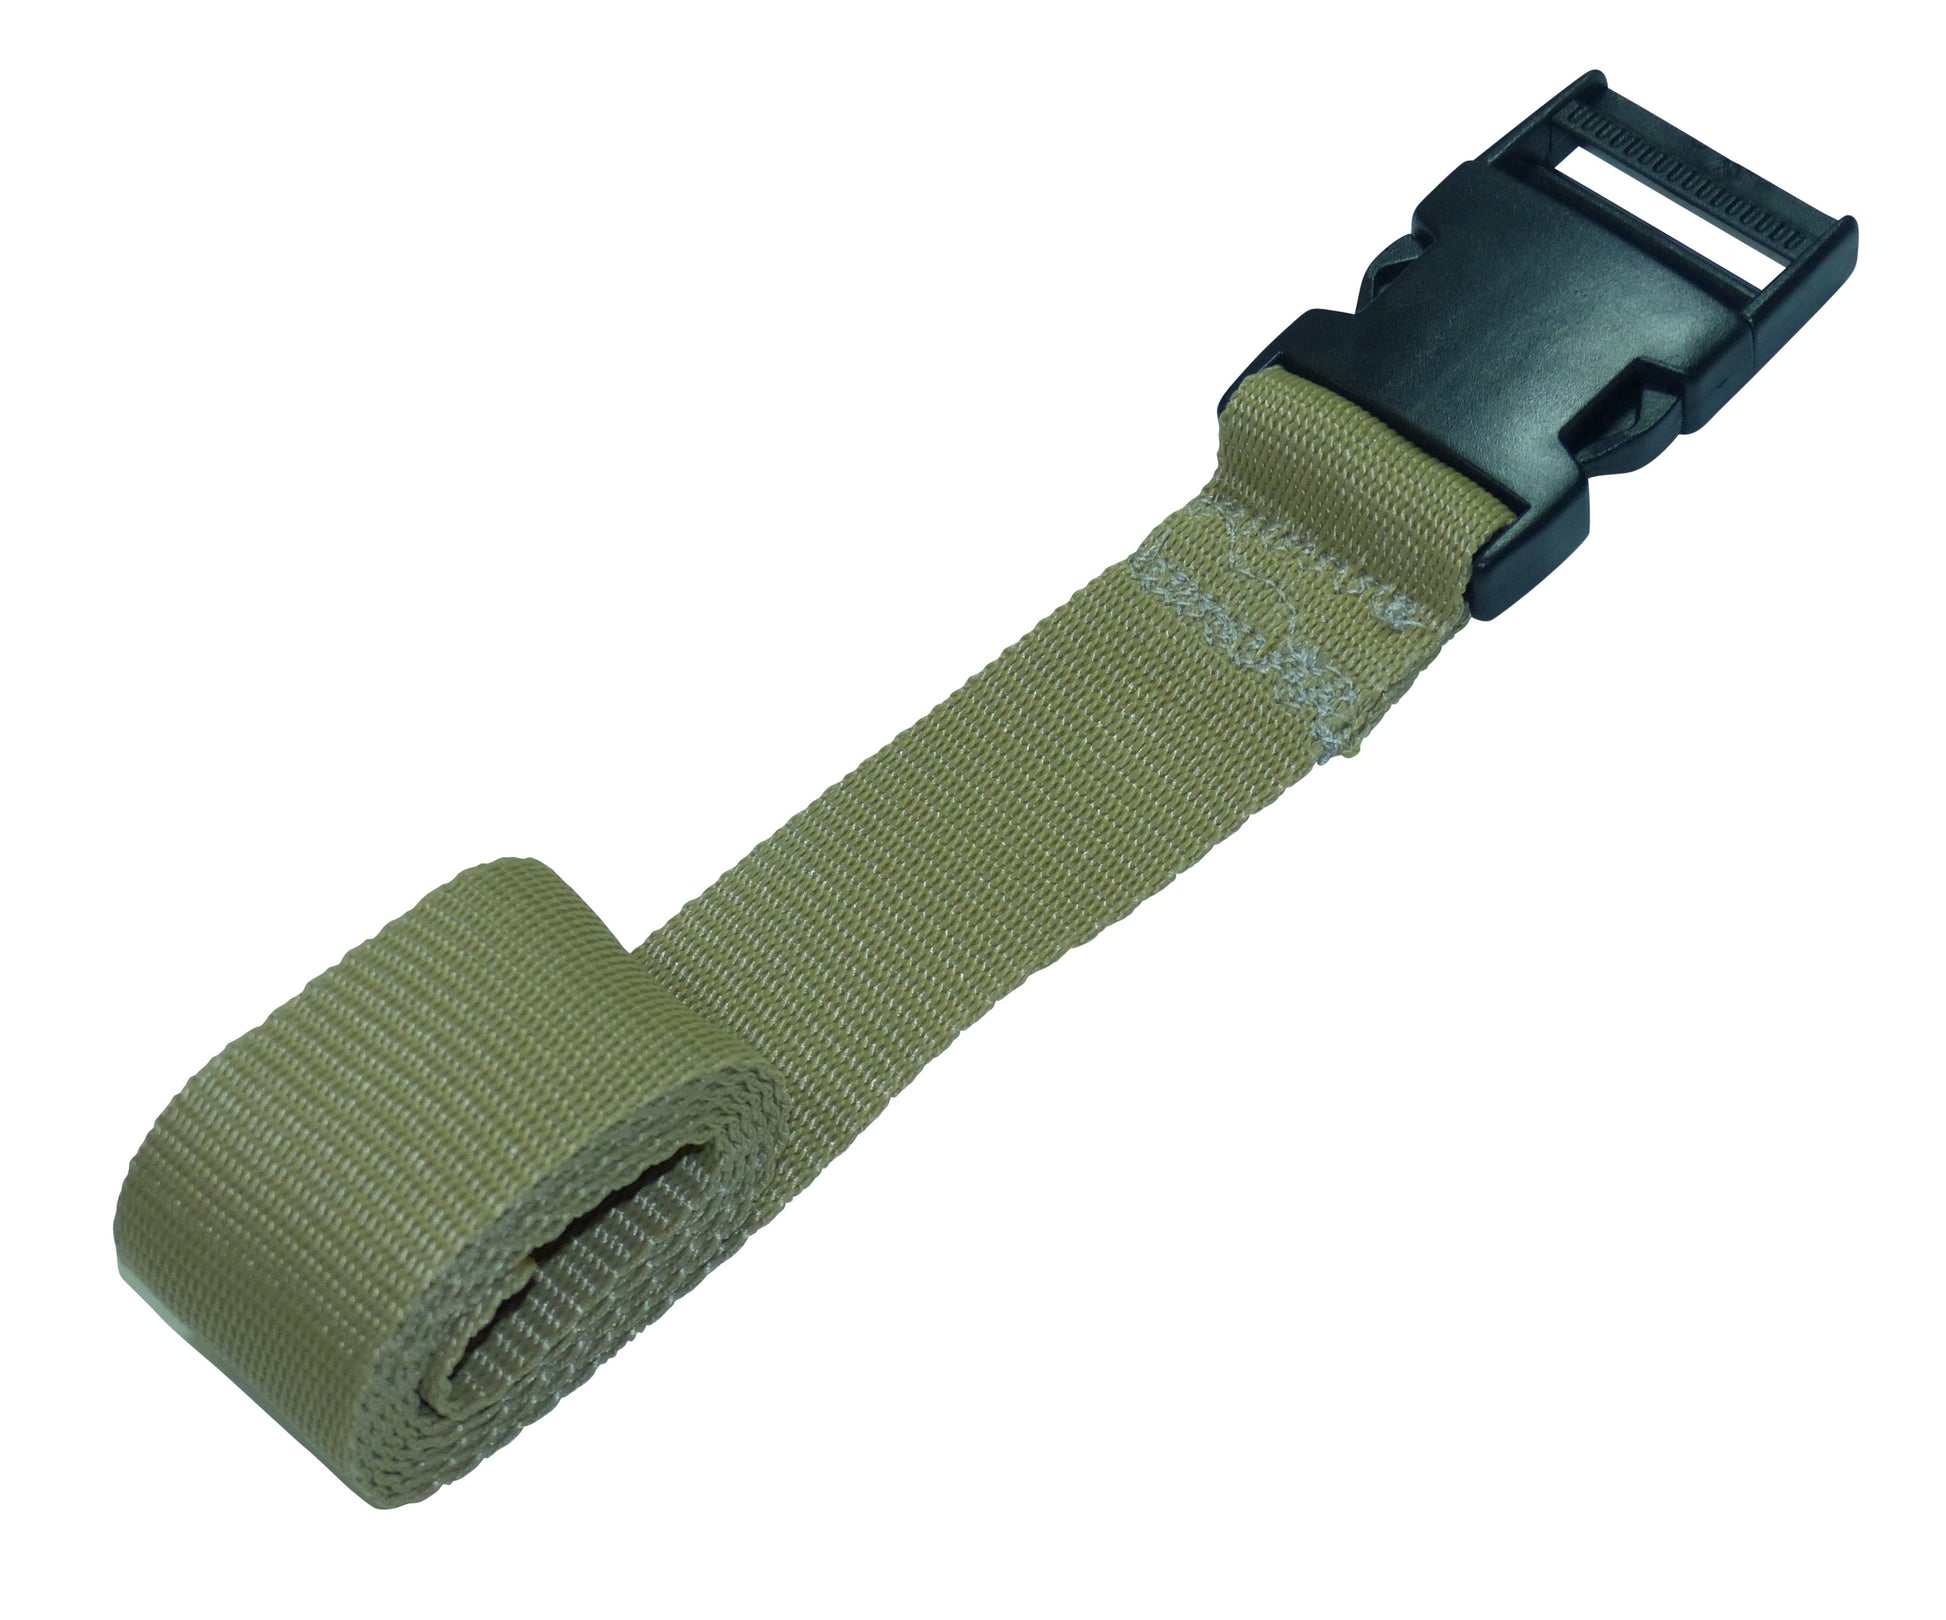 Benristraps 38mm Webbing Strap with Quick Release Buckle in beige